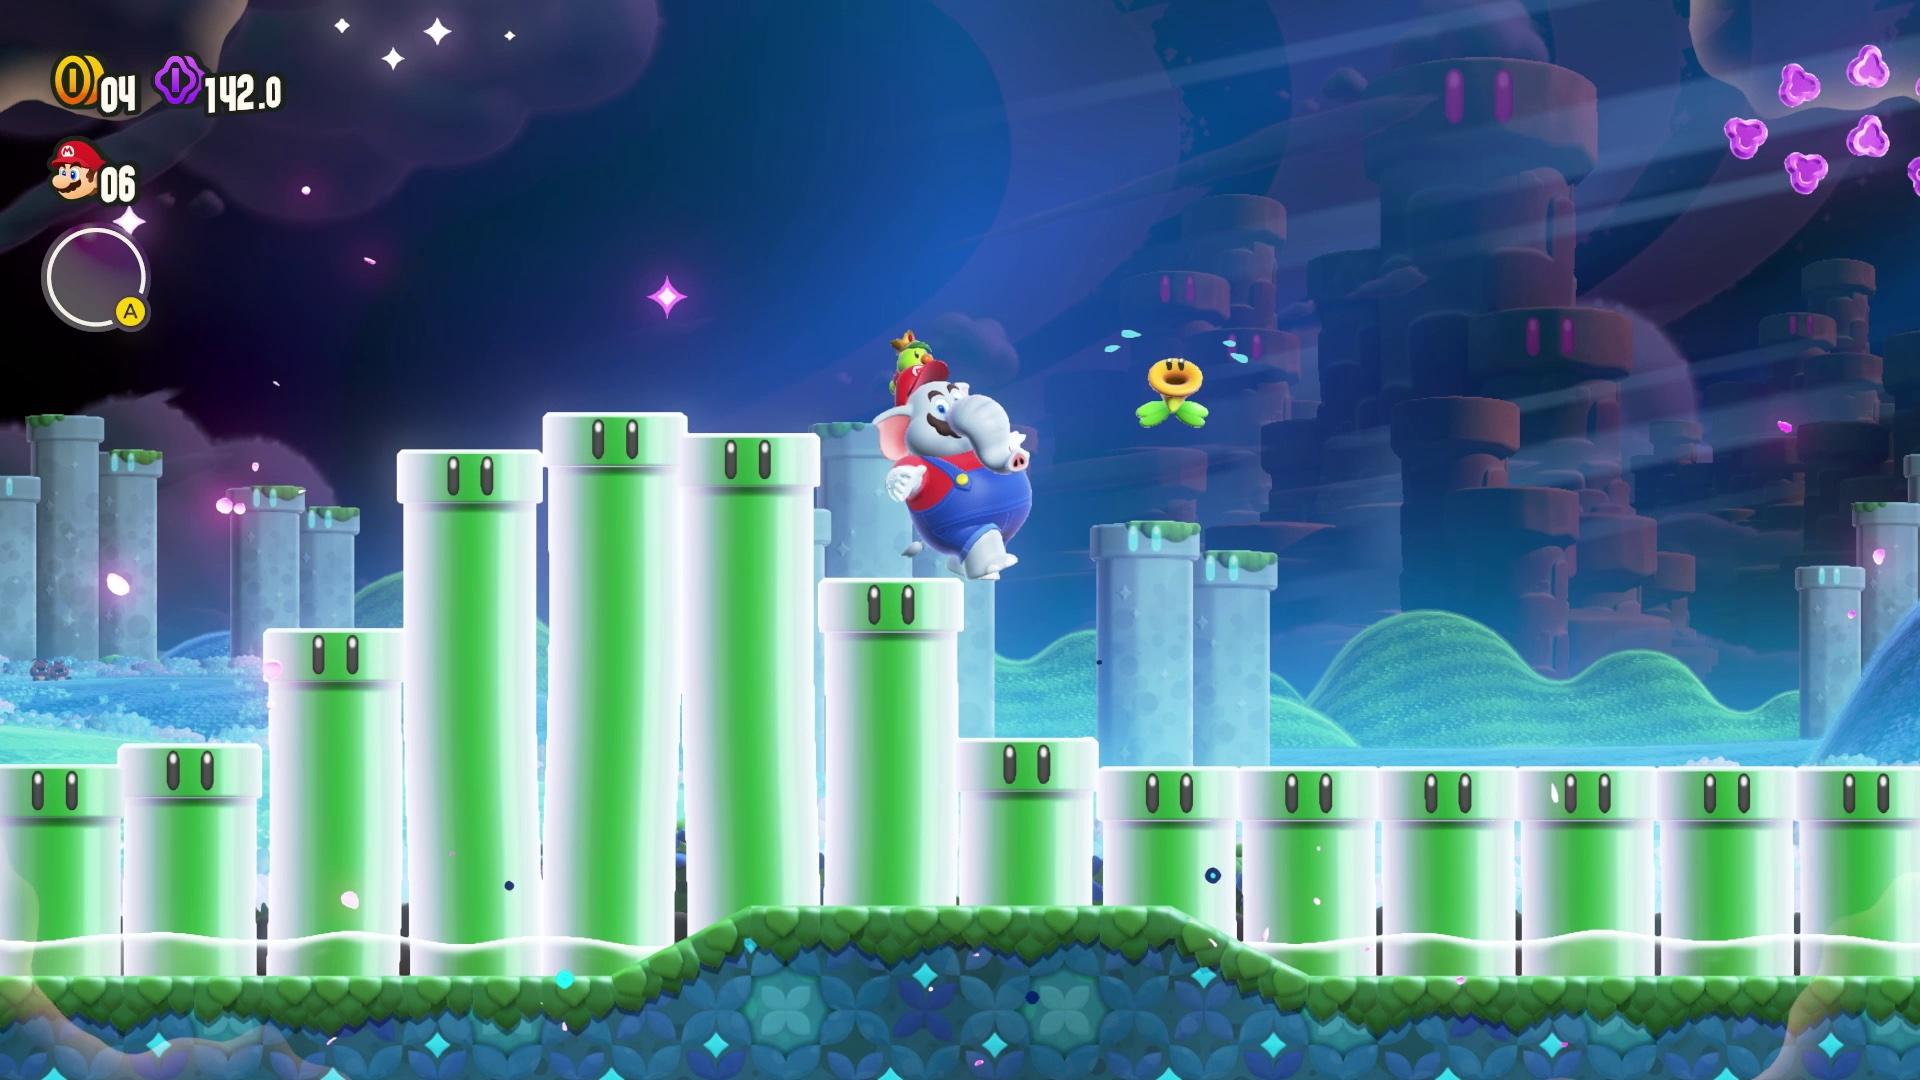 Mario using the elephant power-up after a Wonder Flower in 'Super Mario Bros. Wonder'